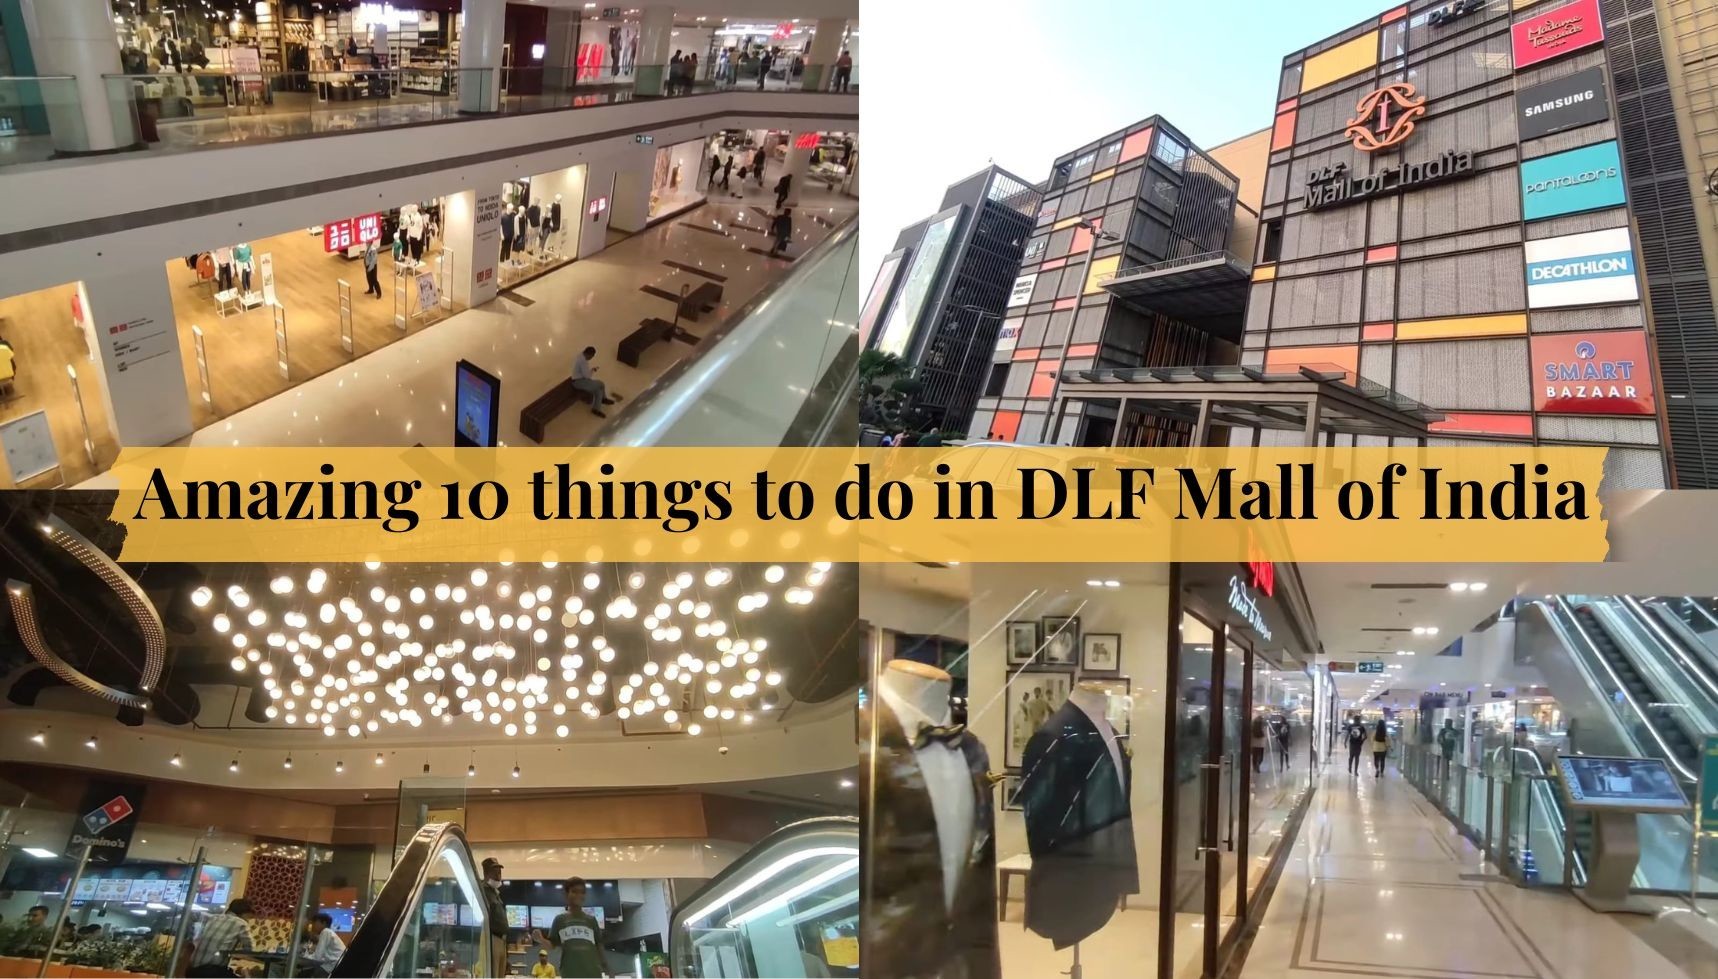 Discovering Delights: 10 Amazing Things to Do in DLF Mall of India